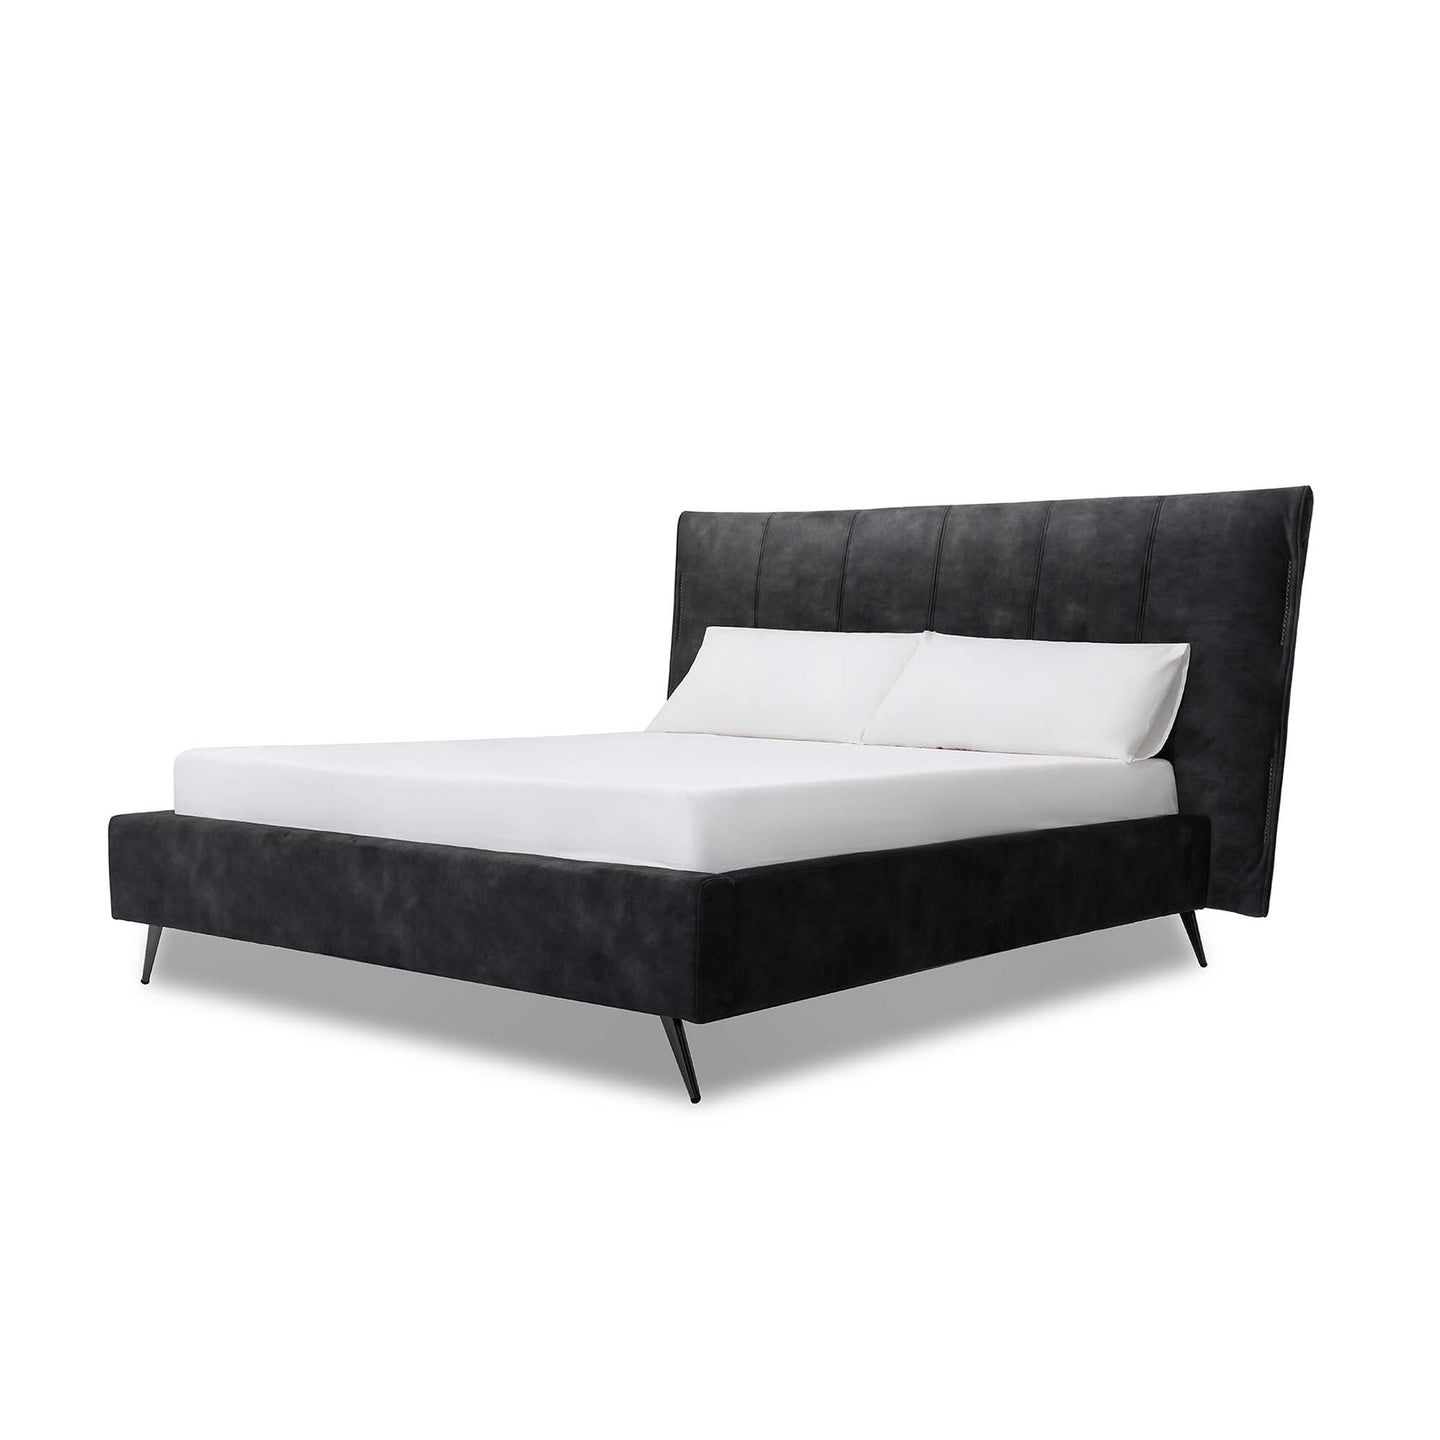 A flat headboard bedframe is a sleek and minimalist option for those looking to add a touch of sophistication to their bedroom. Finley's headboard design is space saving, fits into any bedroom interior easily. Plus, with its understated elegance, it provides a versatile backdrop for your bedding accessories. 